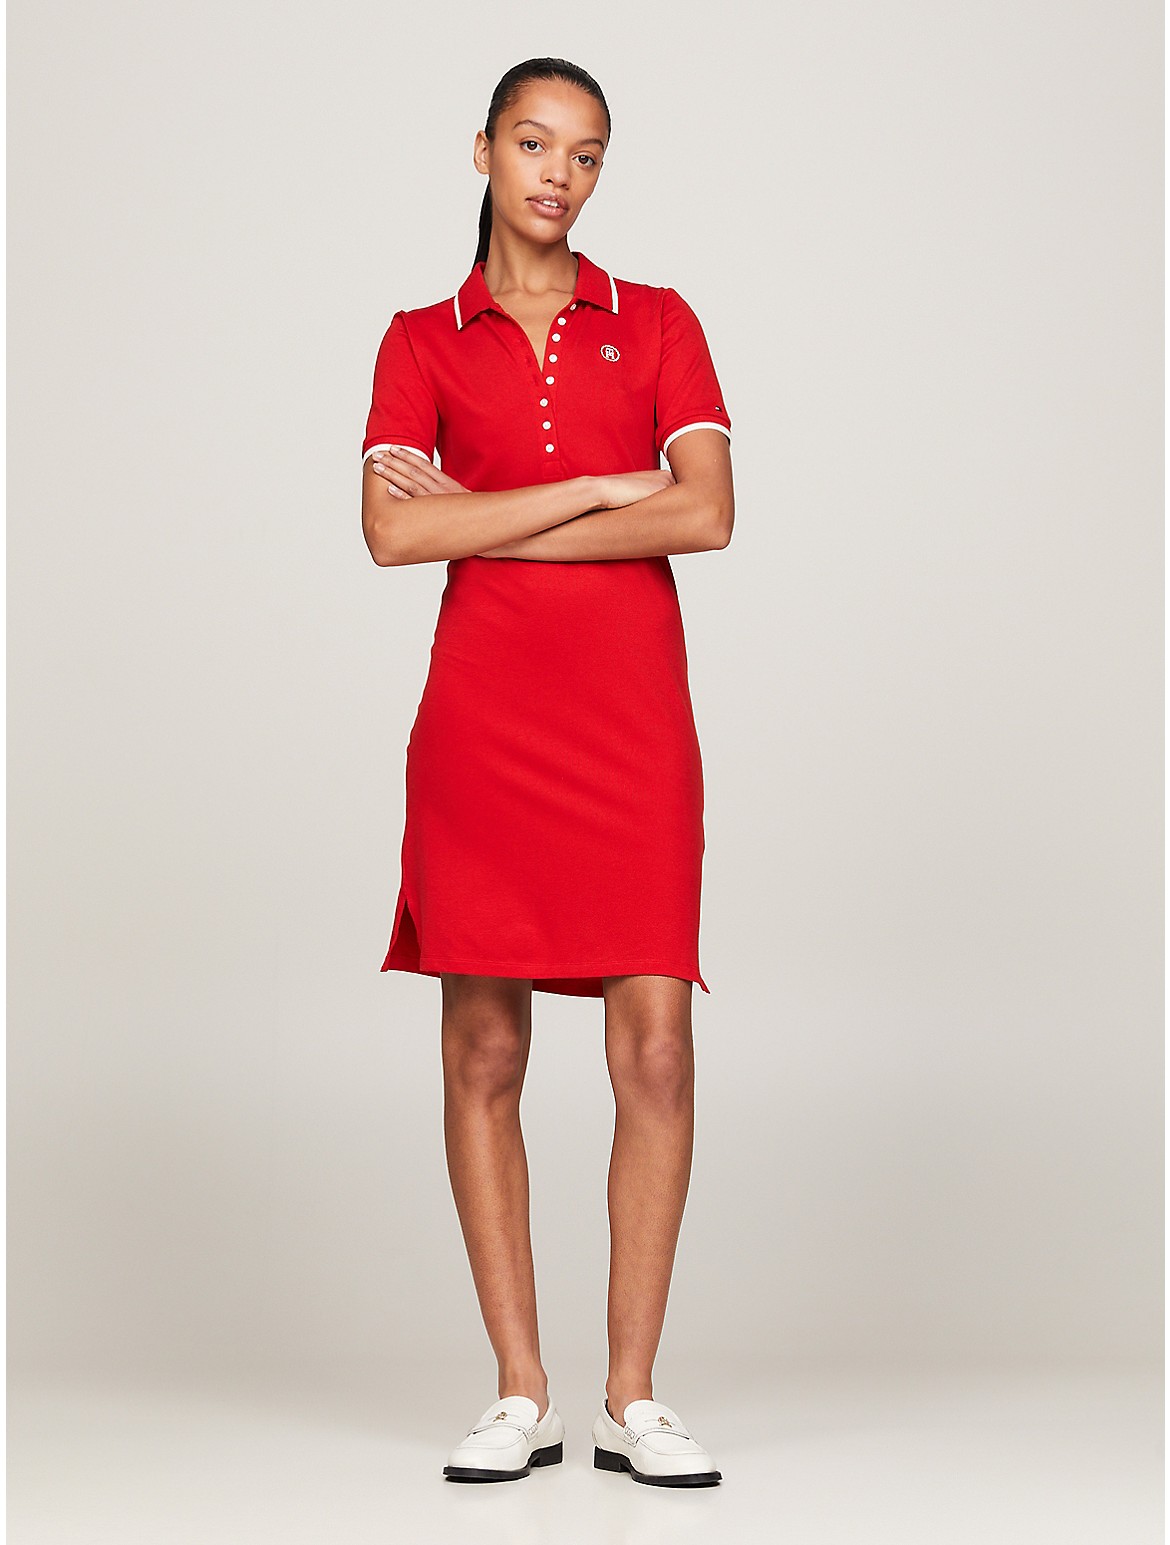 Tommy Hilfiger Women's Slim Fit Tipped Polo Dress